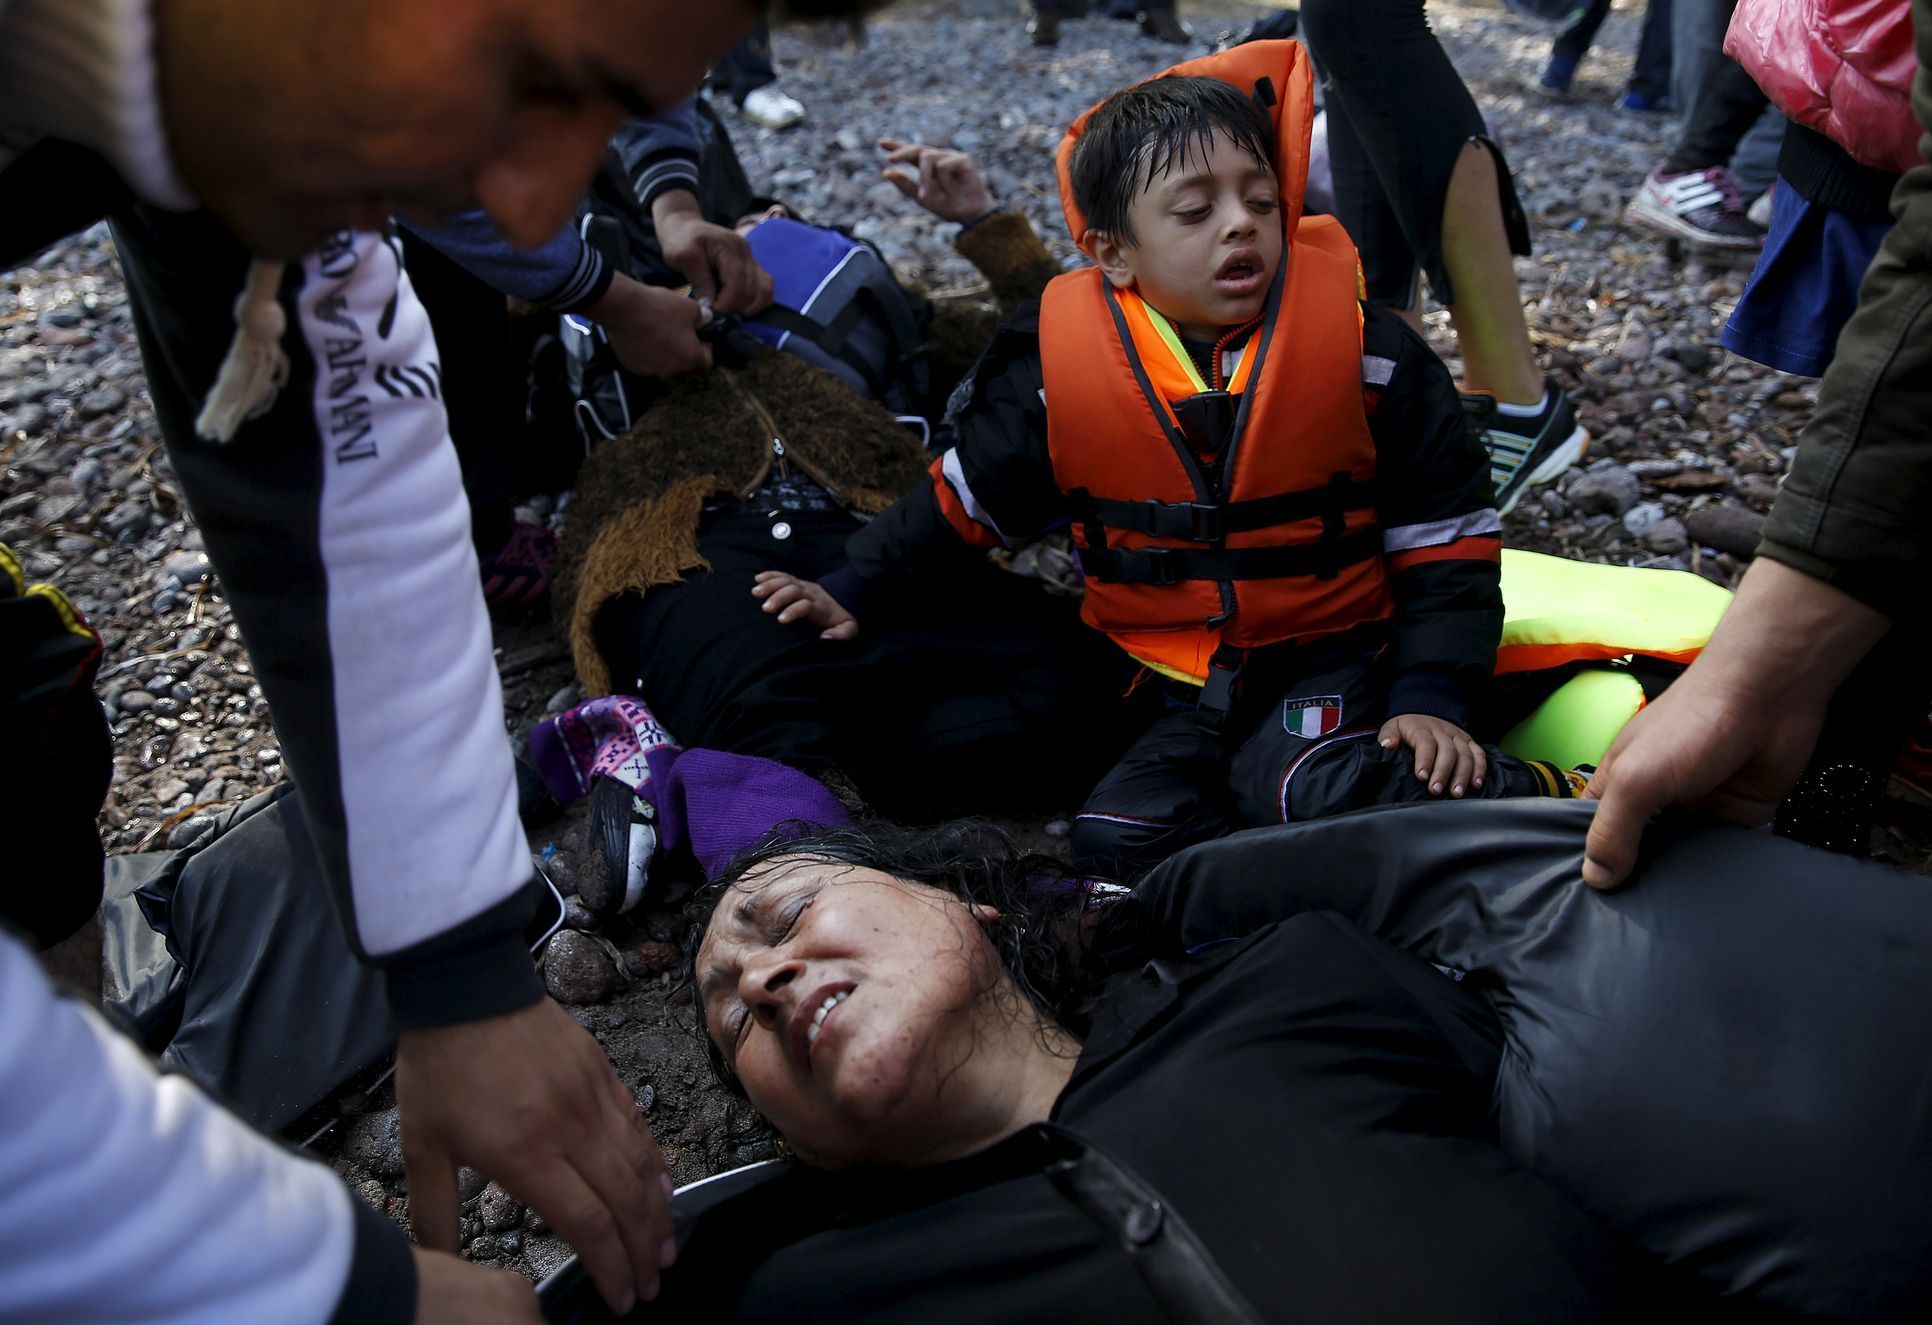 An Afghan migrant woman collapses in exhaustion soon after arriving on an overcrowded raft at a beach on the Greek island of Lesbos